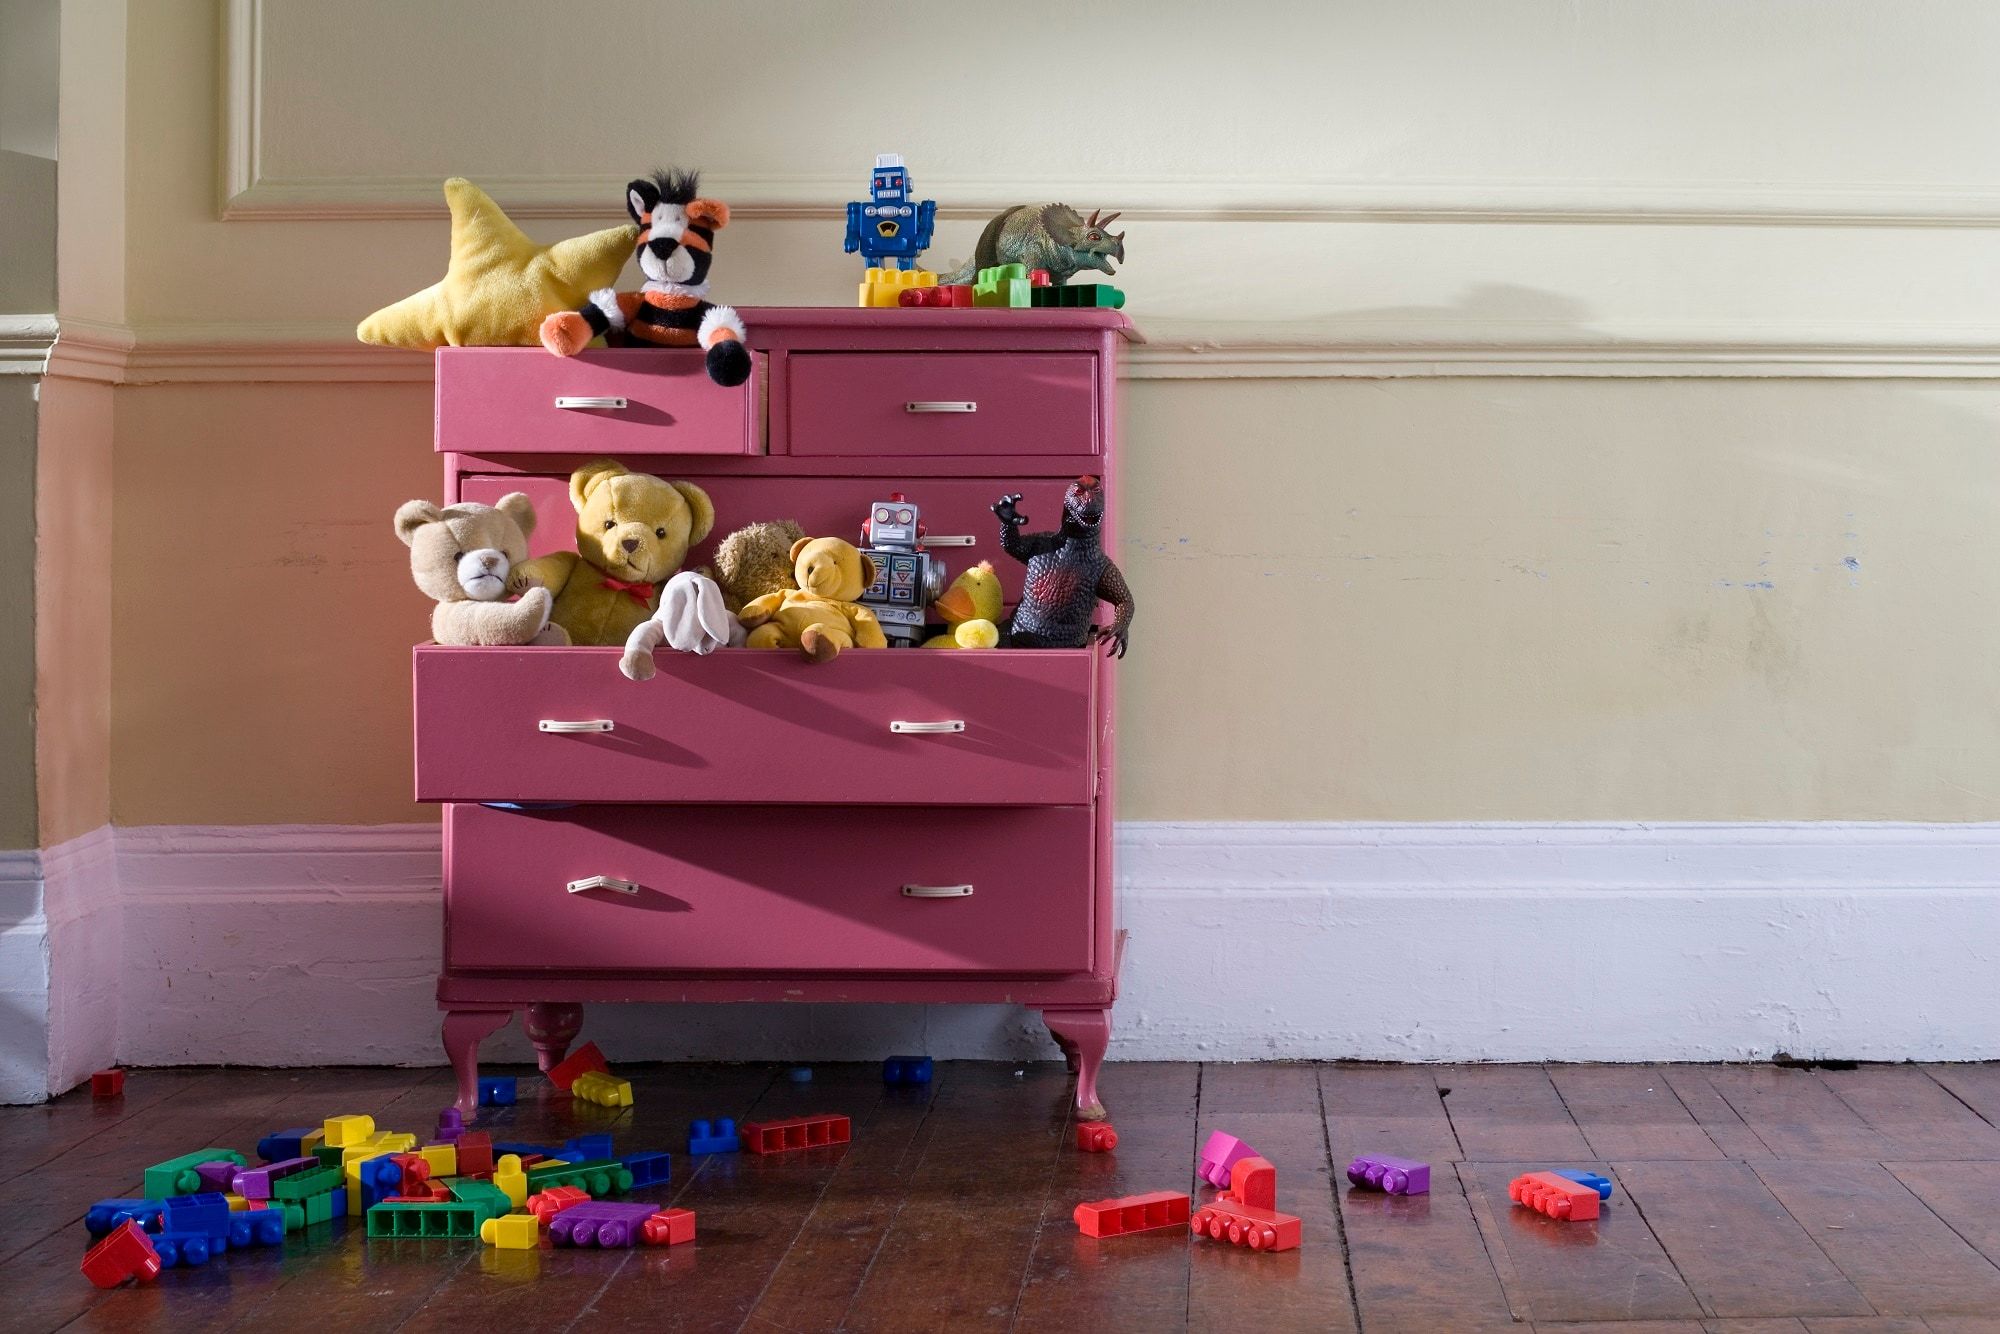 Setting up your home for childminding